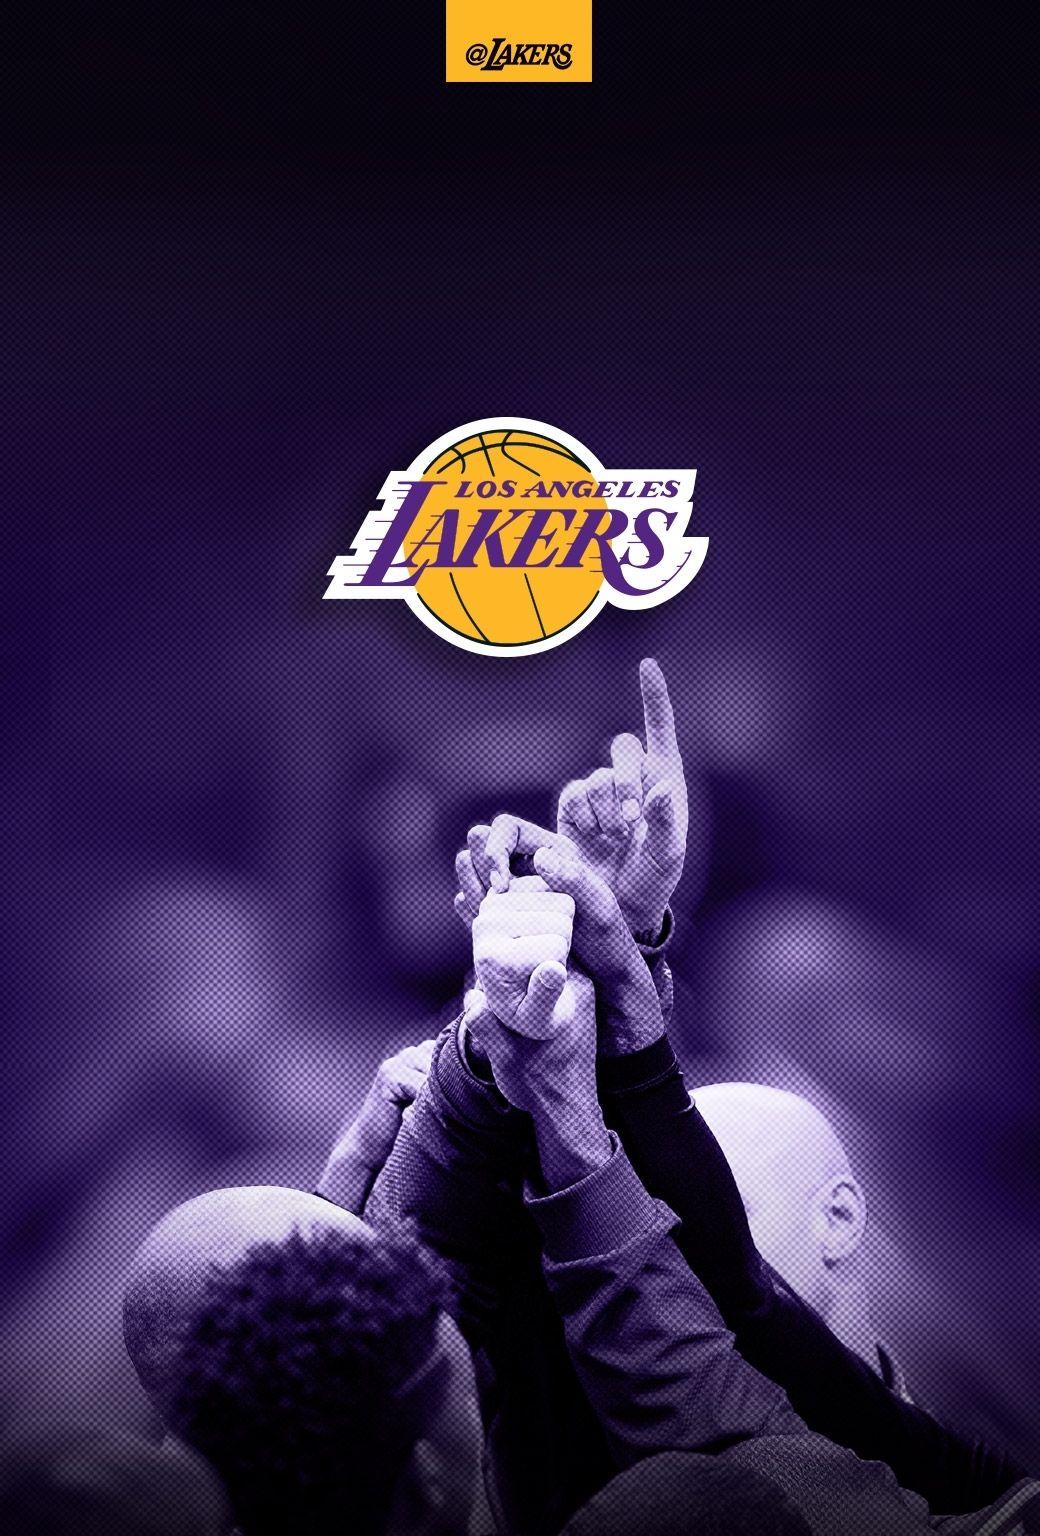 Latest La Lakers Wallpaper For Android FULL HD 1920×1080